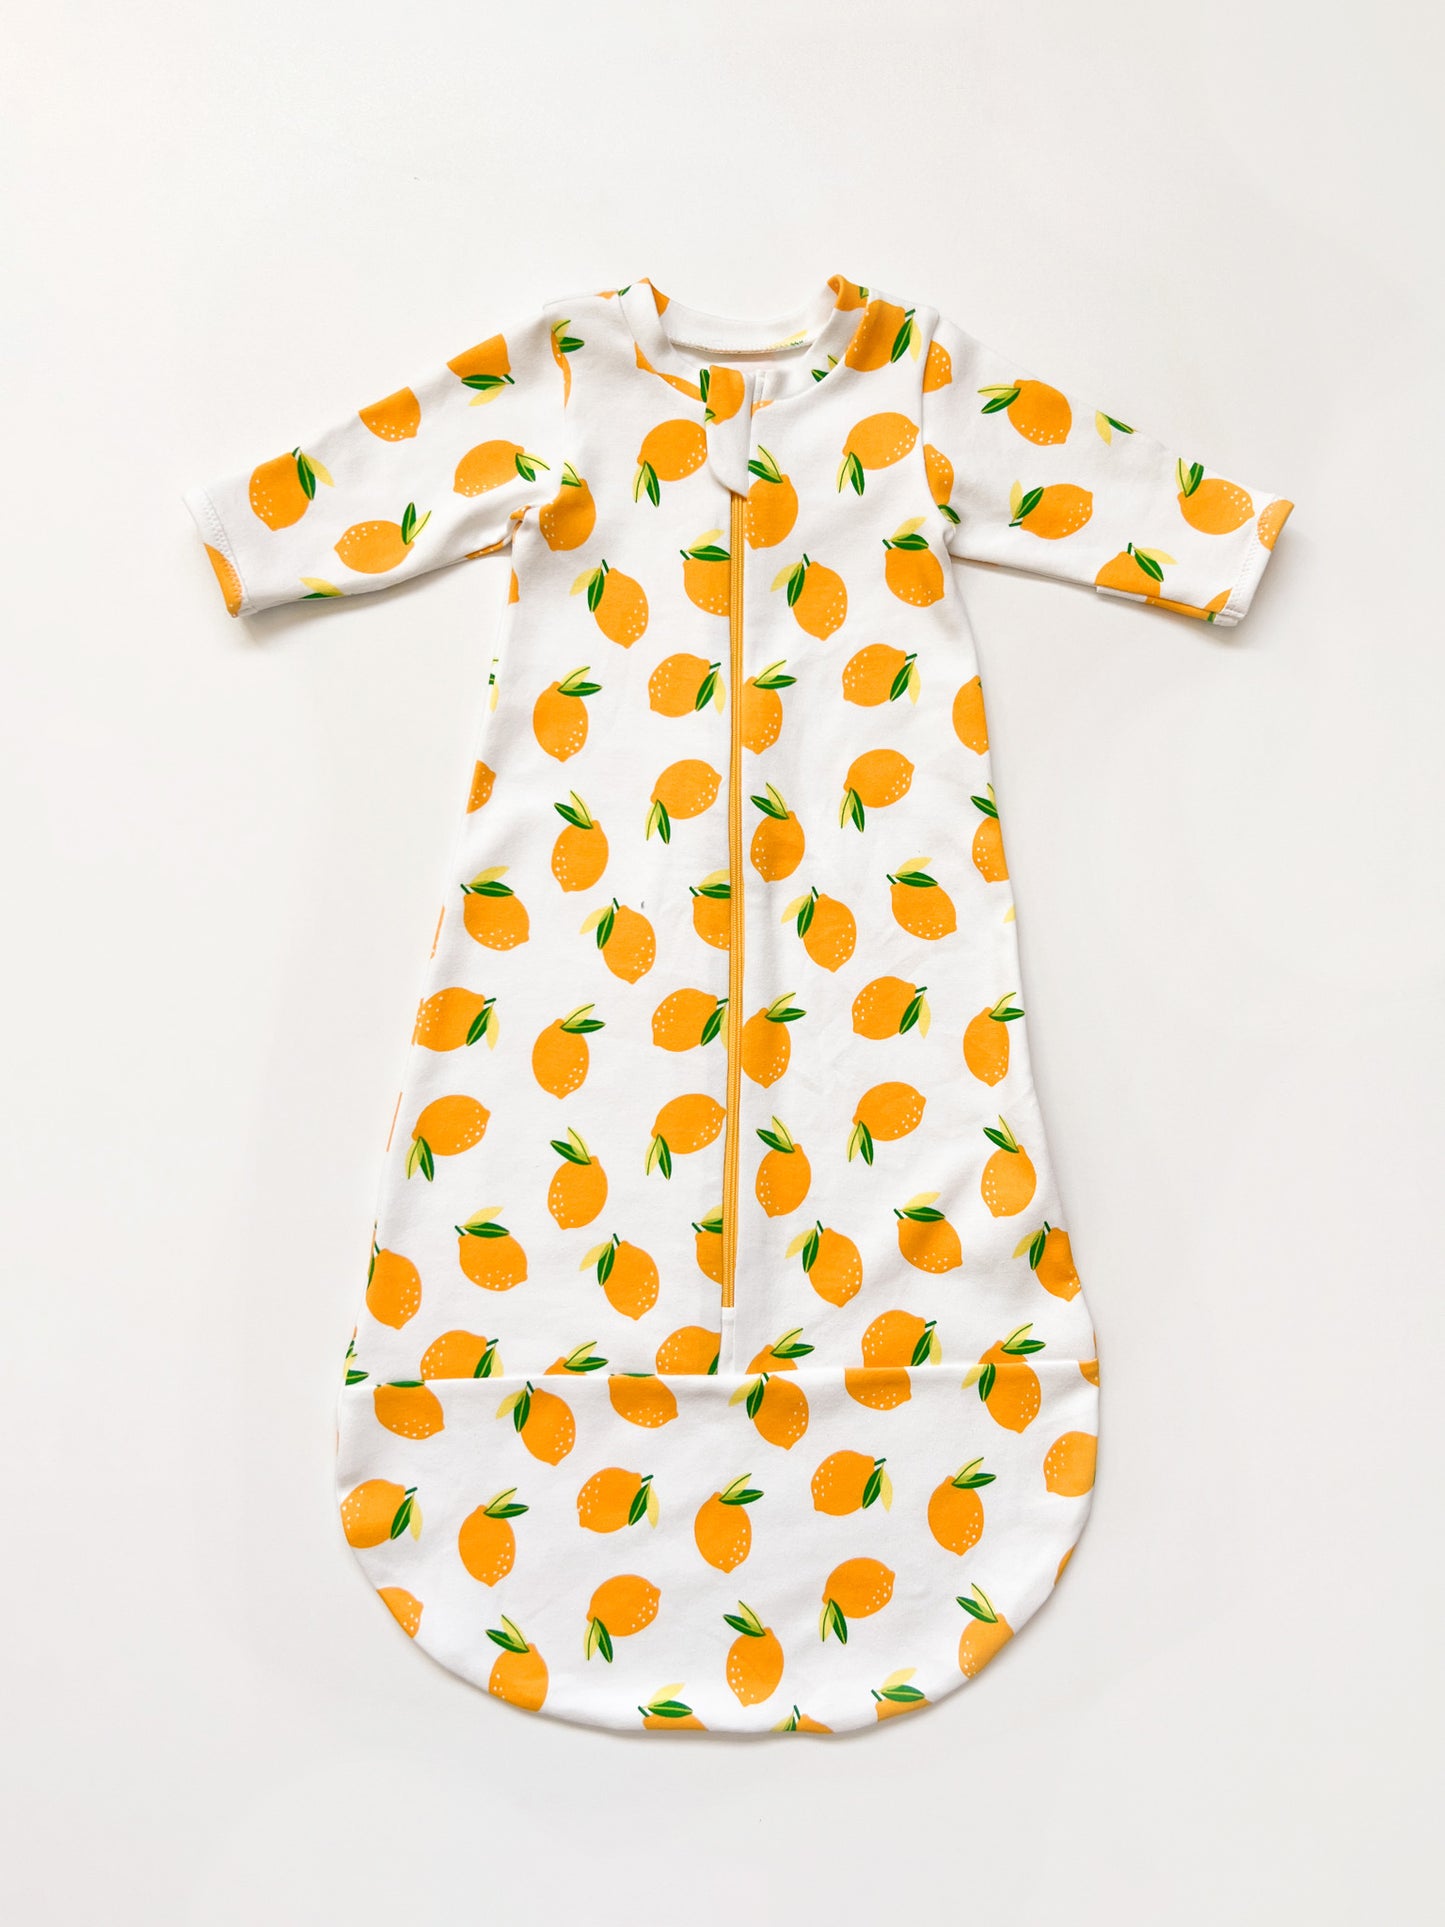 Flatlay of a baby sleepsack with zipper. The sleepsack is made in a white knit fabric with lemon print.